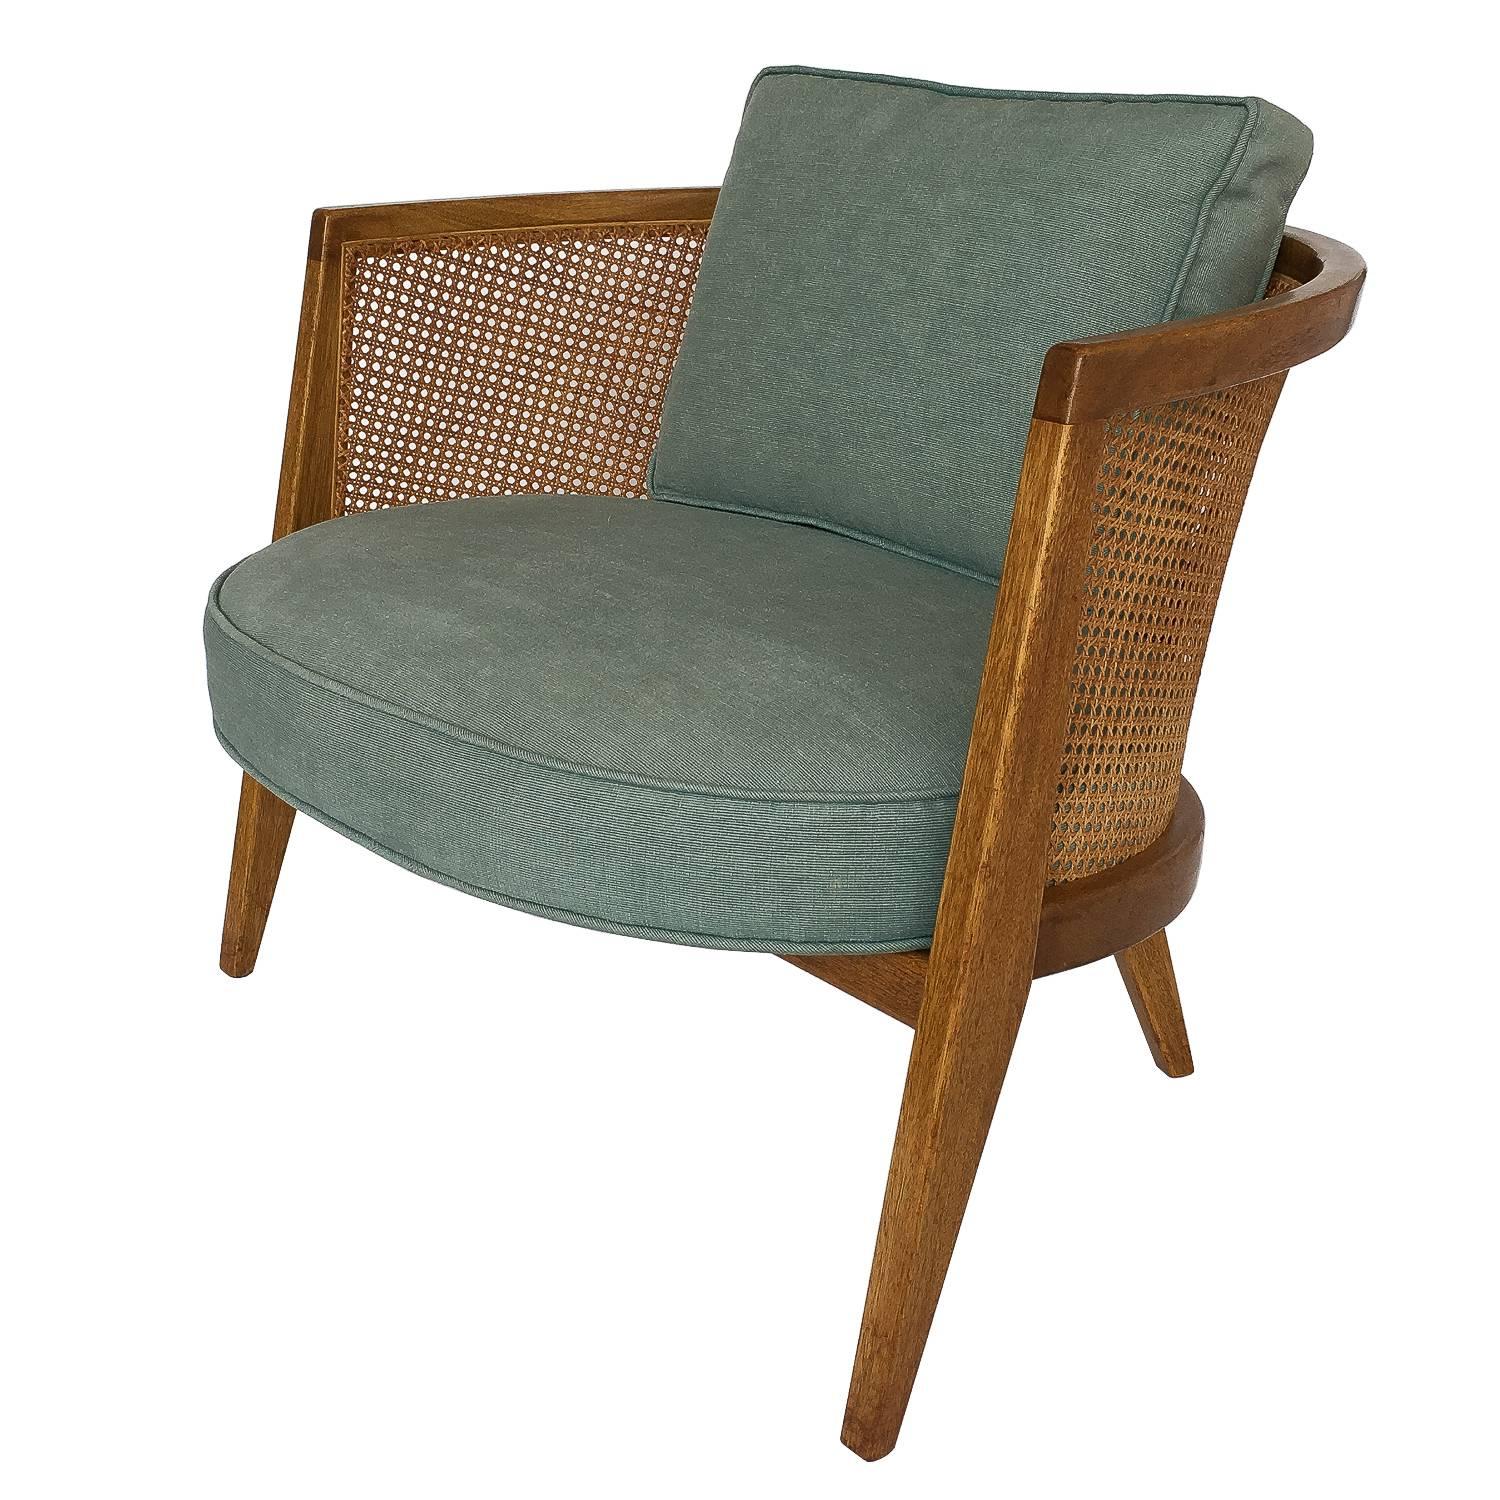 Harvey Probber Cane Curved Back Lounge Chair